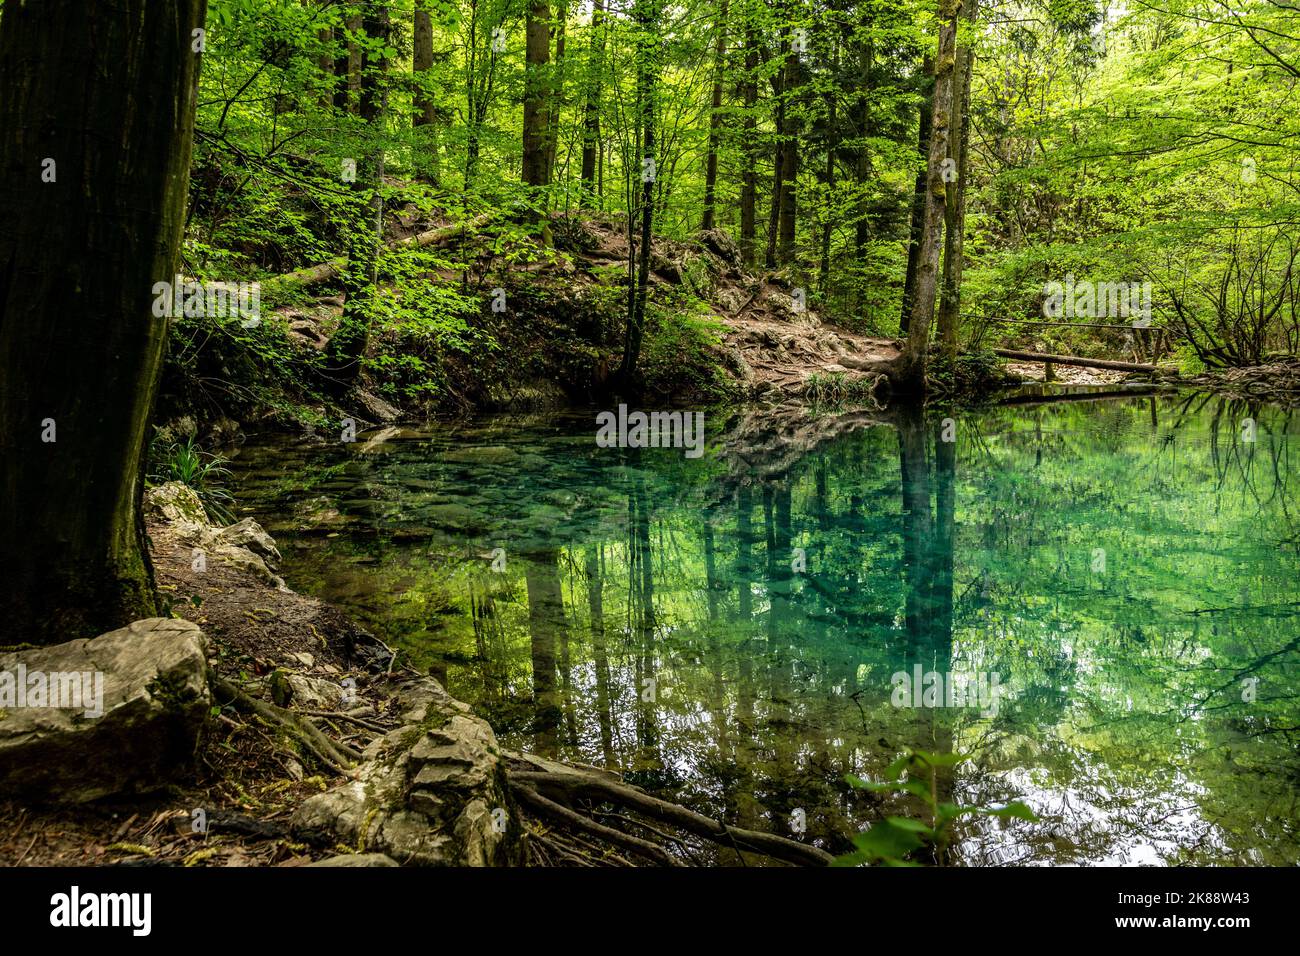 A mirror lake in a dense forest in Romania Stock Photo